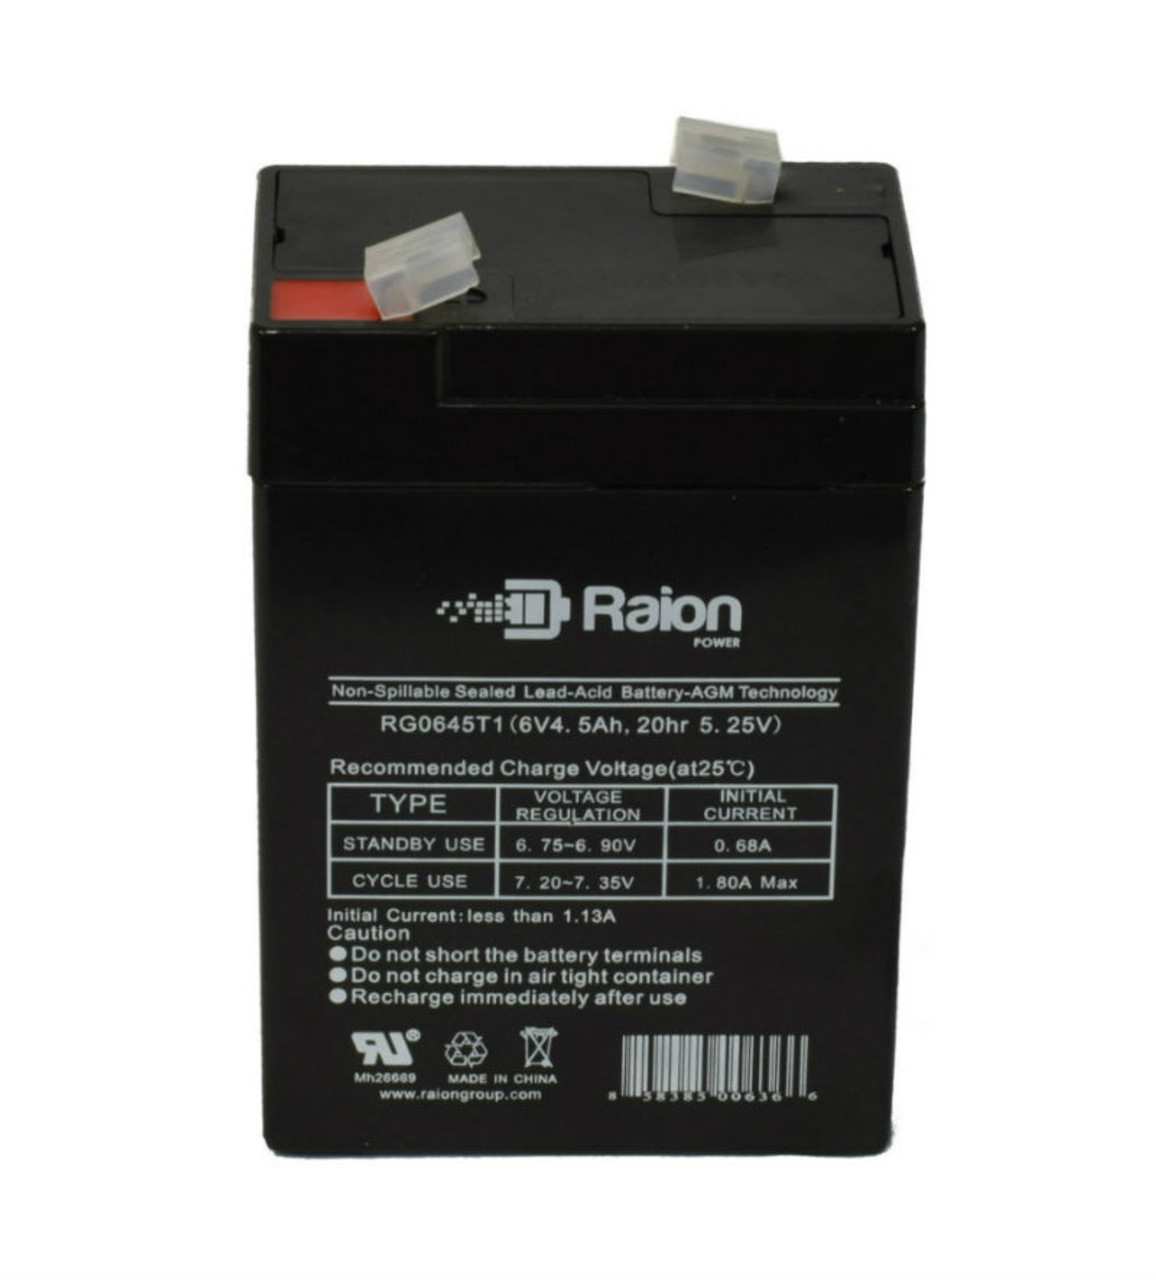 Raion Power RG0645T1 Replacement Battery Cartridge for Light Alarms 5E15BK